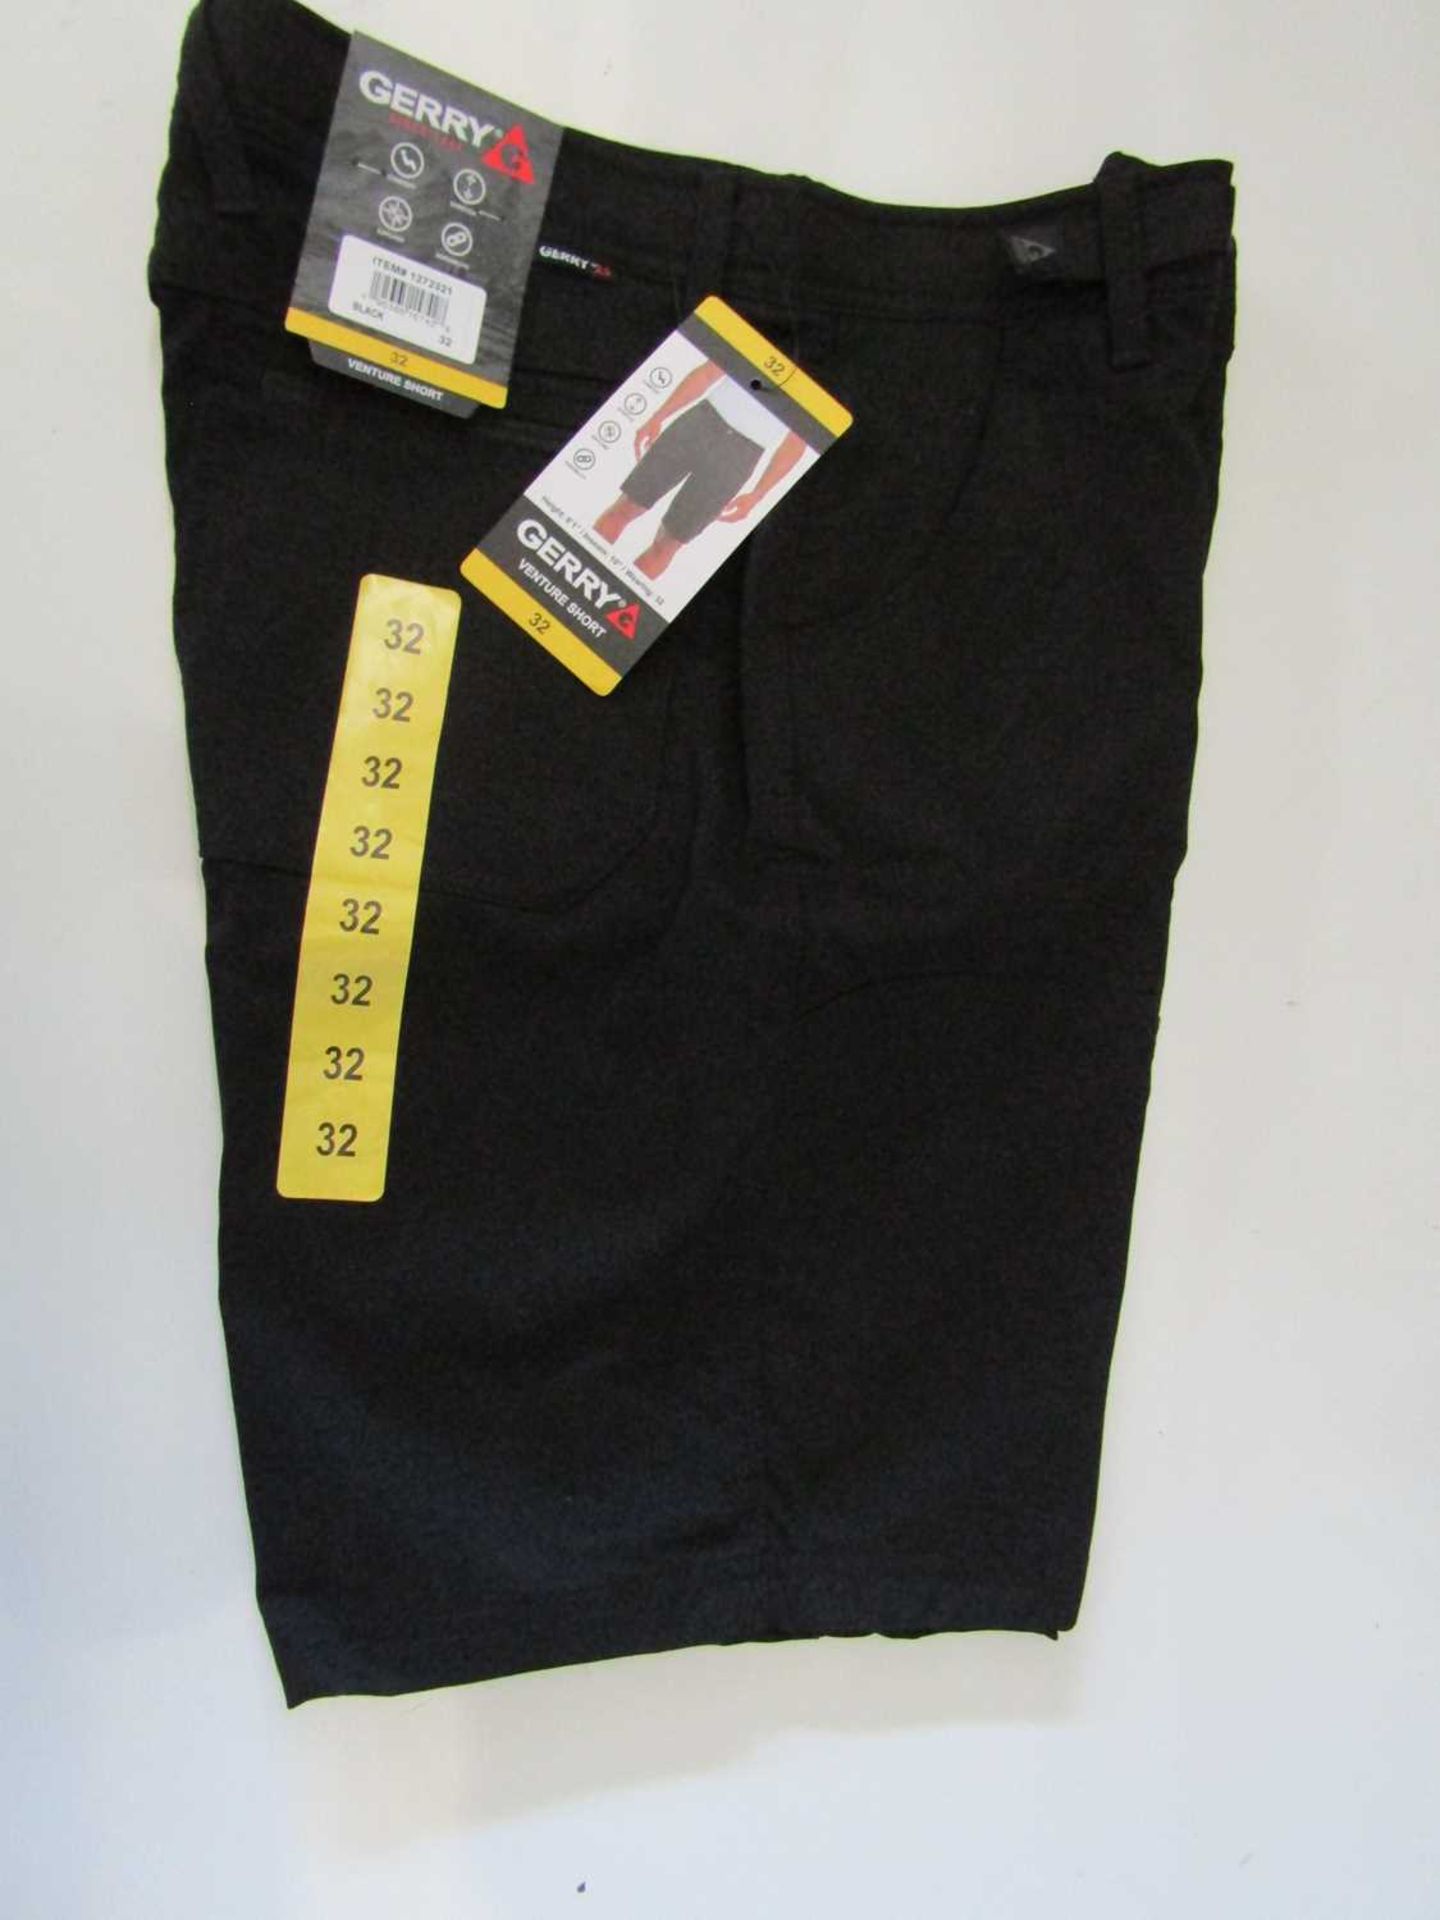 VAT Gerry Venture Shorts Black Size S New With Tags